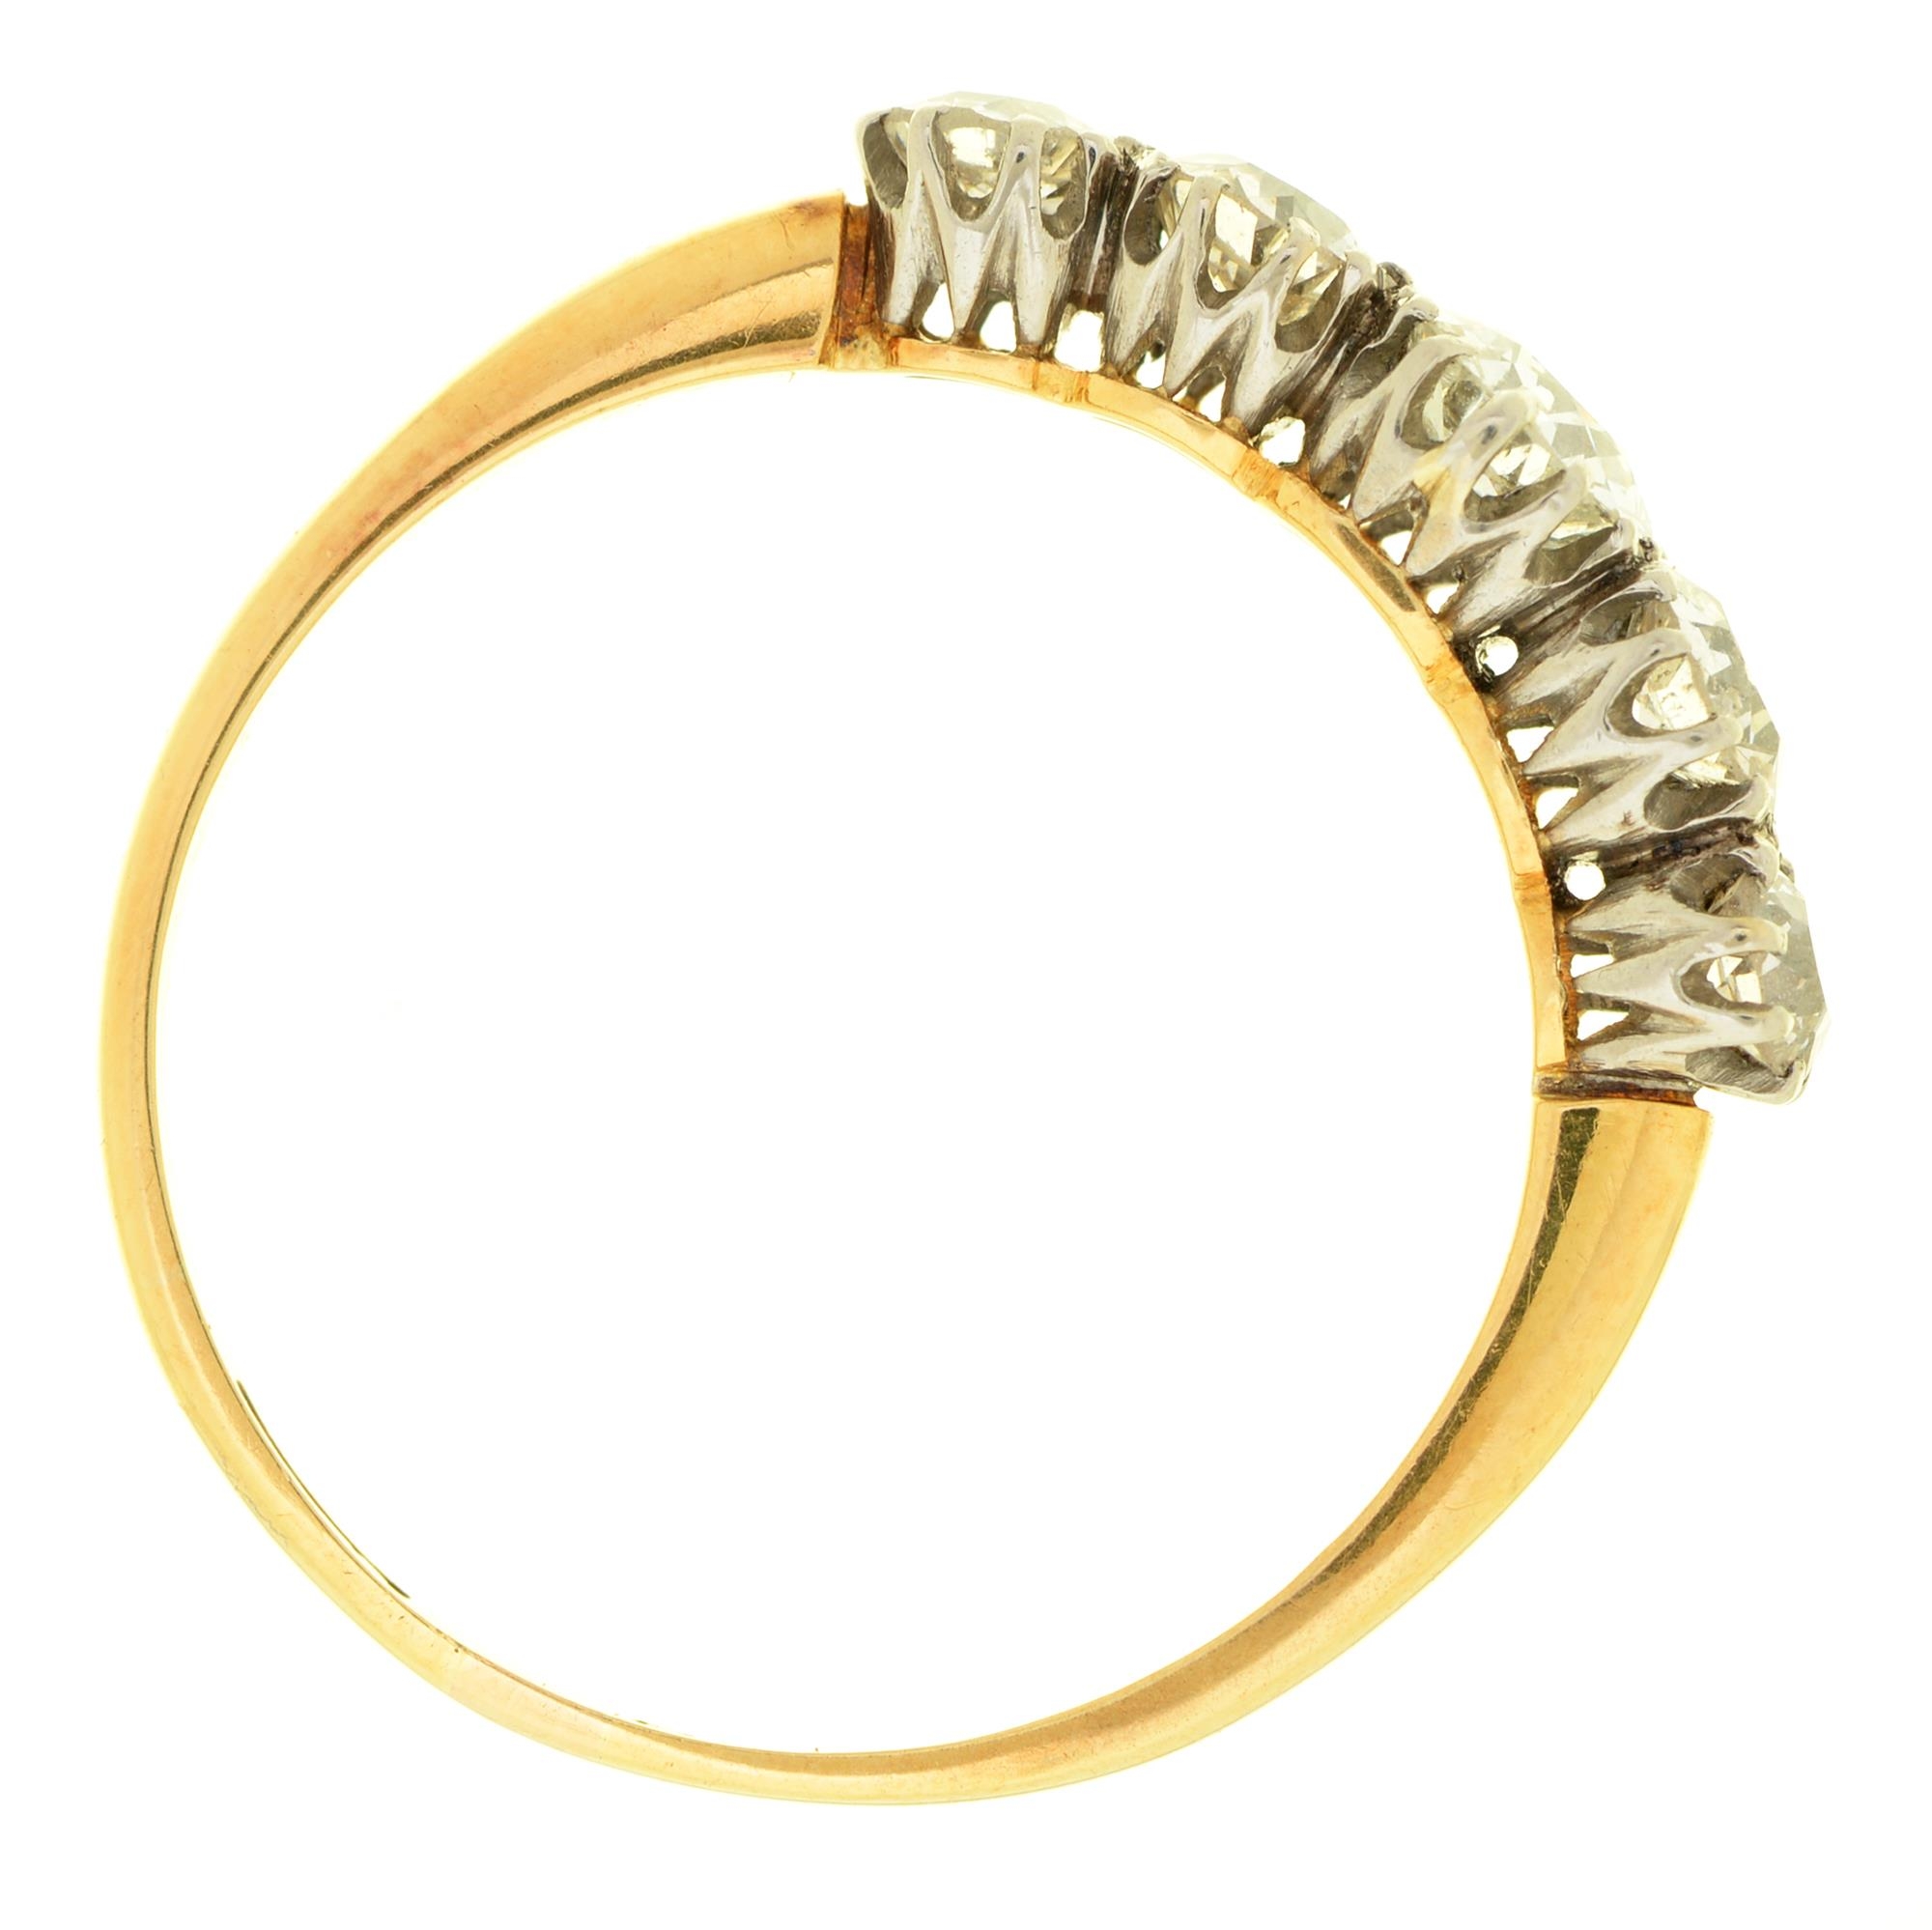 A five stone diamond ring, early 20th c, with old cut diamonds, gold hoop marked 18ct and engraved - Image 2 of 2